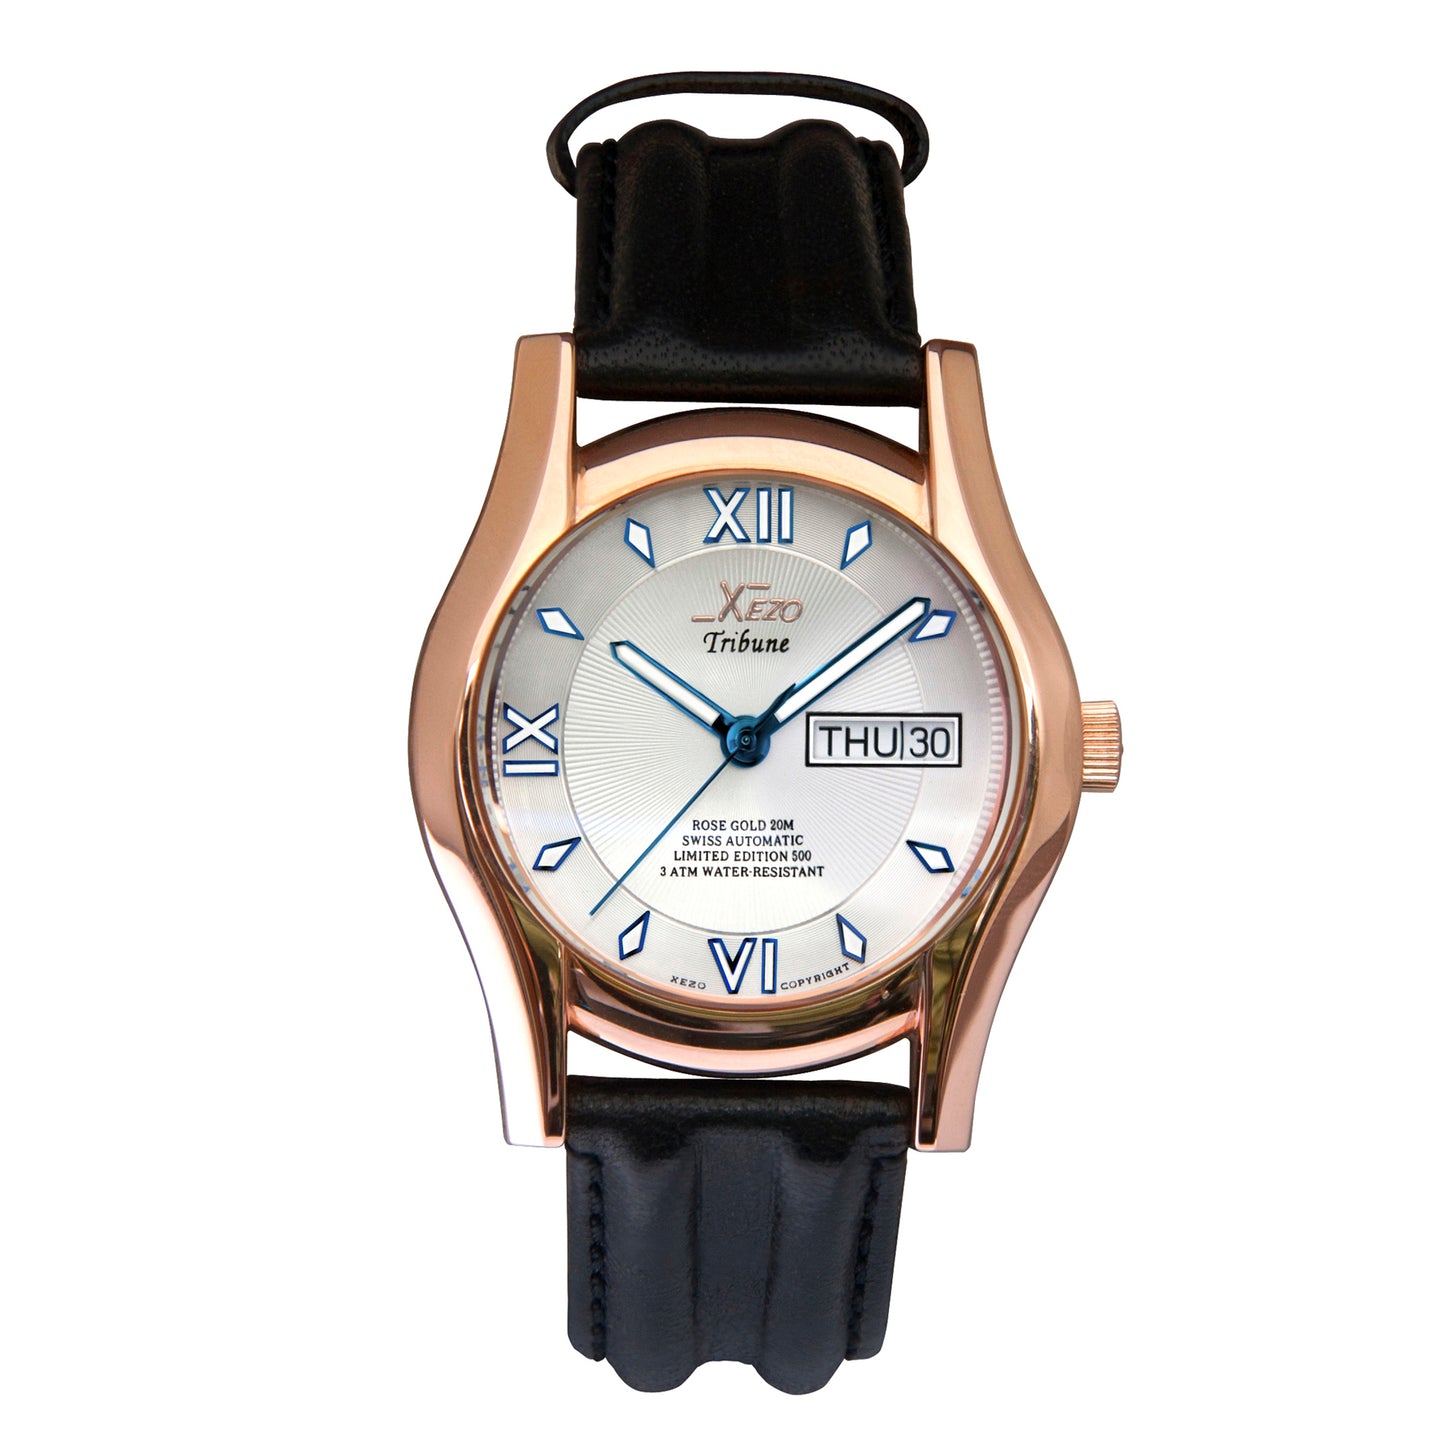 Xezo - Tribune 2121 RG Sterling Silver and 18K Rose Gold